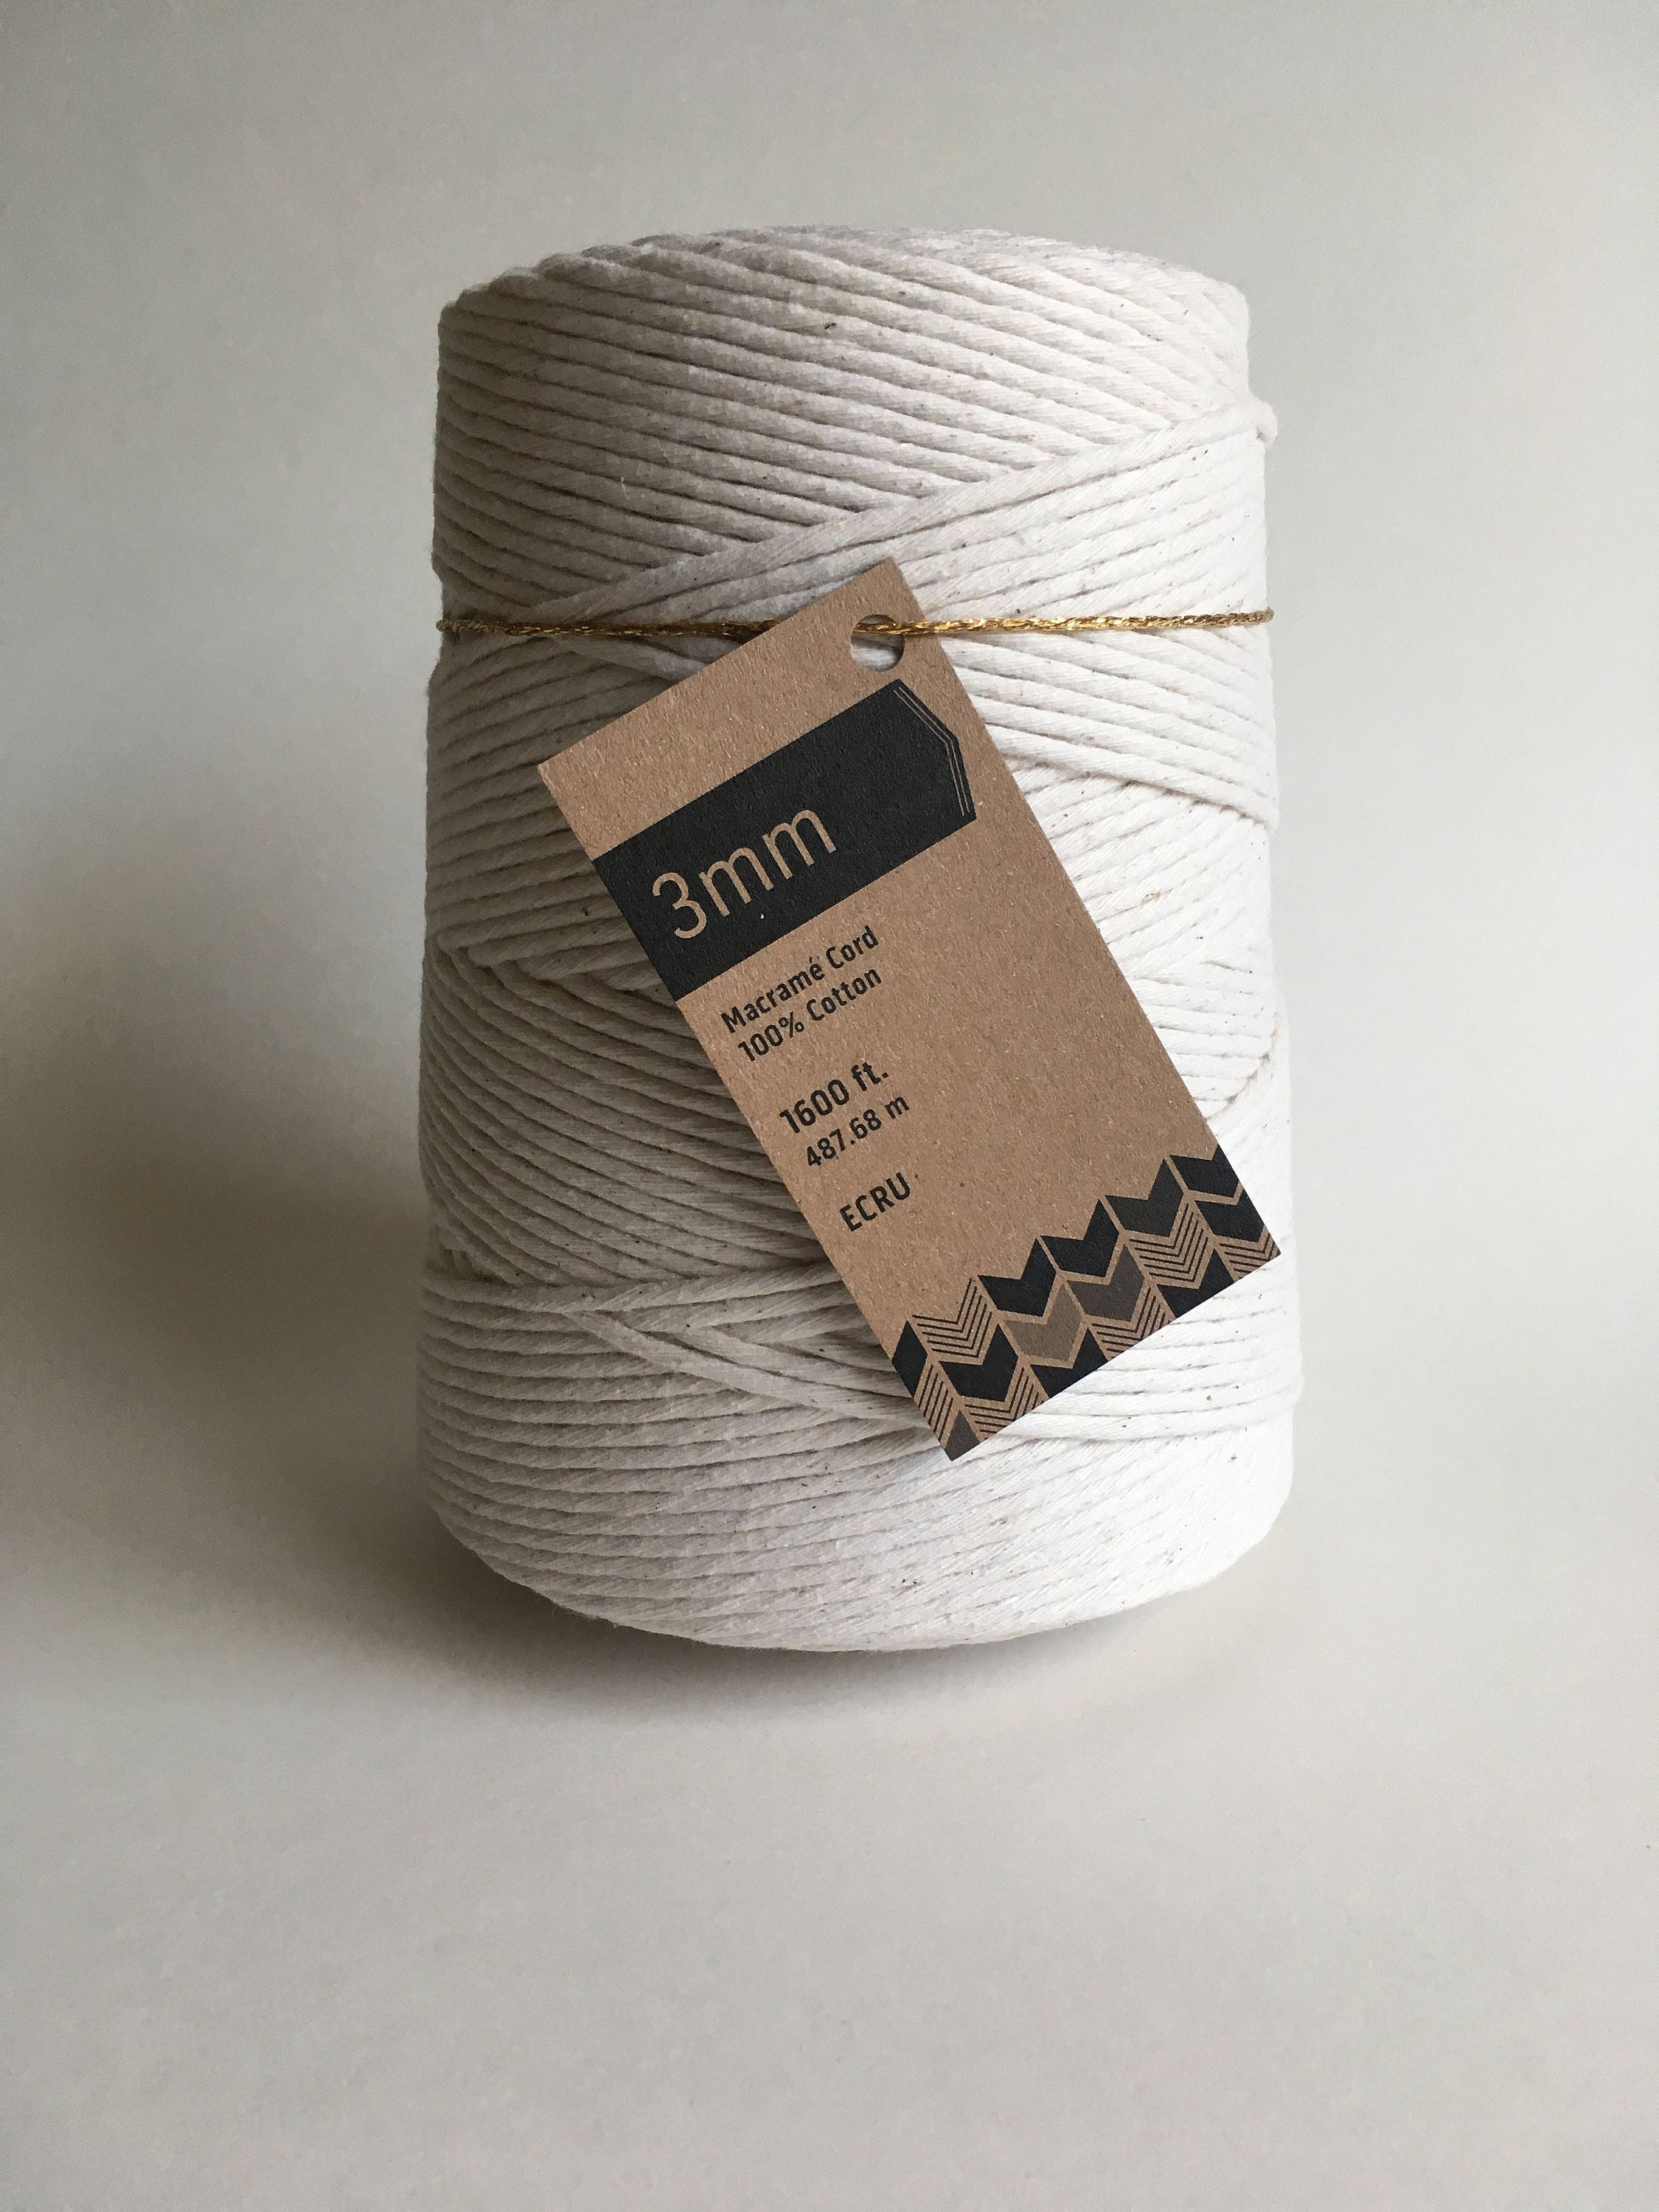 Decorative Projects Crafts ,100% Natural Cotton Soft Cotton Rope for Handmade Plant Hanger Knitting 1mm x 450m/492 Yards Wall Hanging BokWin Macrame Cord Soft Undyed Natural Color Rope 